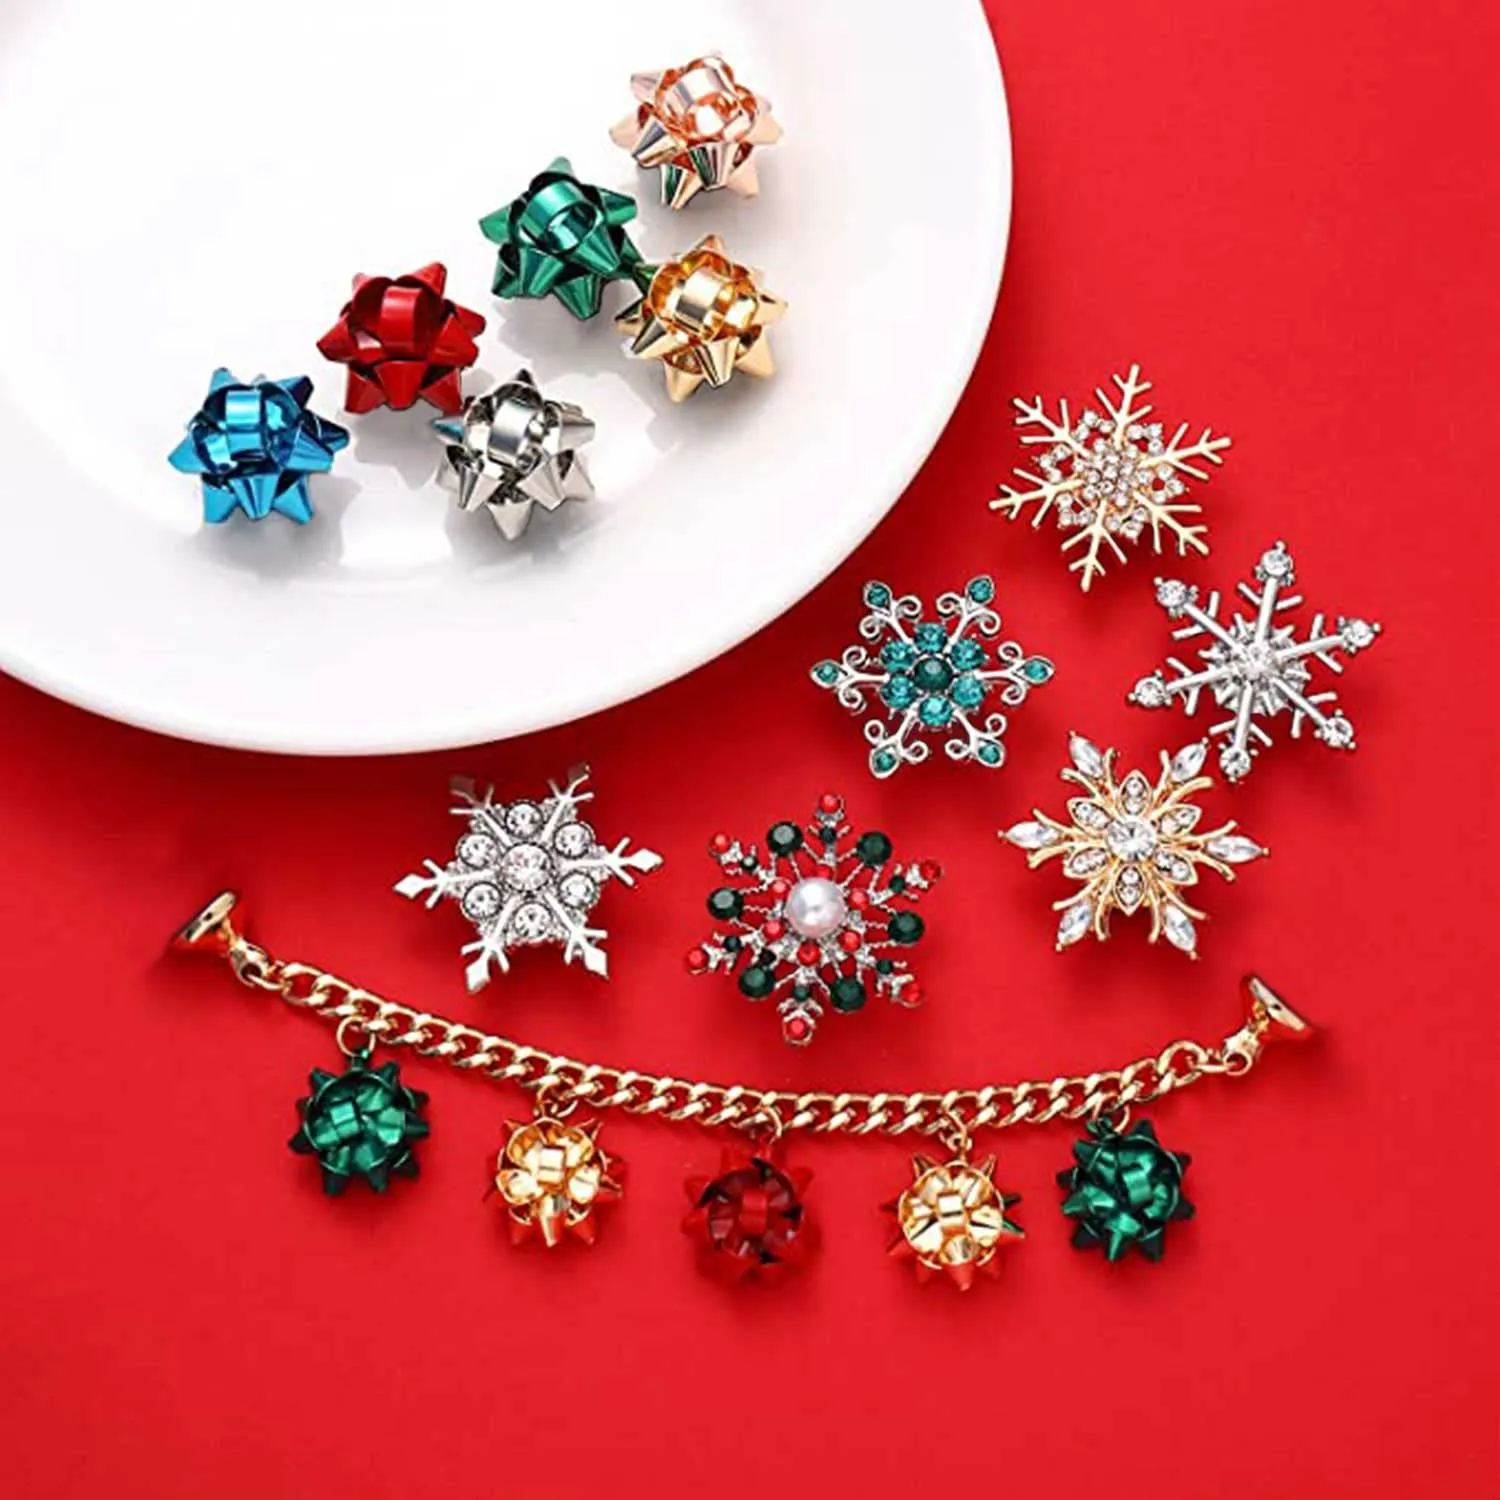 Shoe Parts Accessories Christmas Charms Fits For Clog Sandals Festive Rhinestone Snowflake Gift Bow Snowman Tree Decorations Women H Otjzb